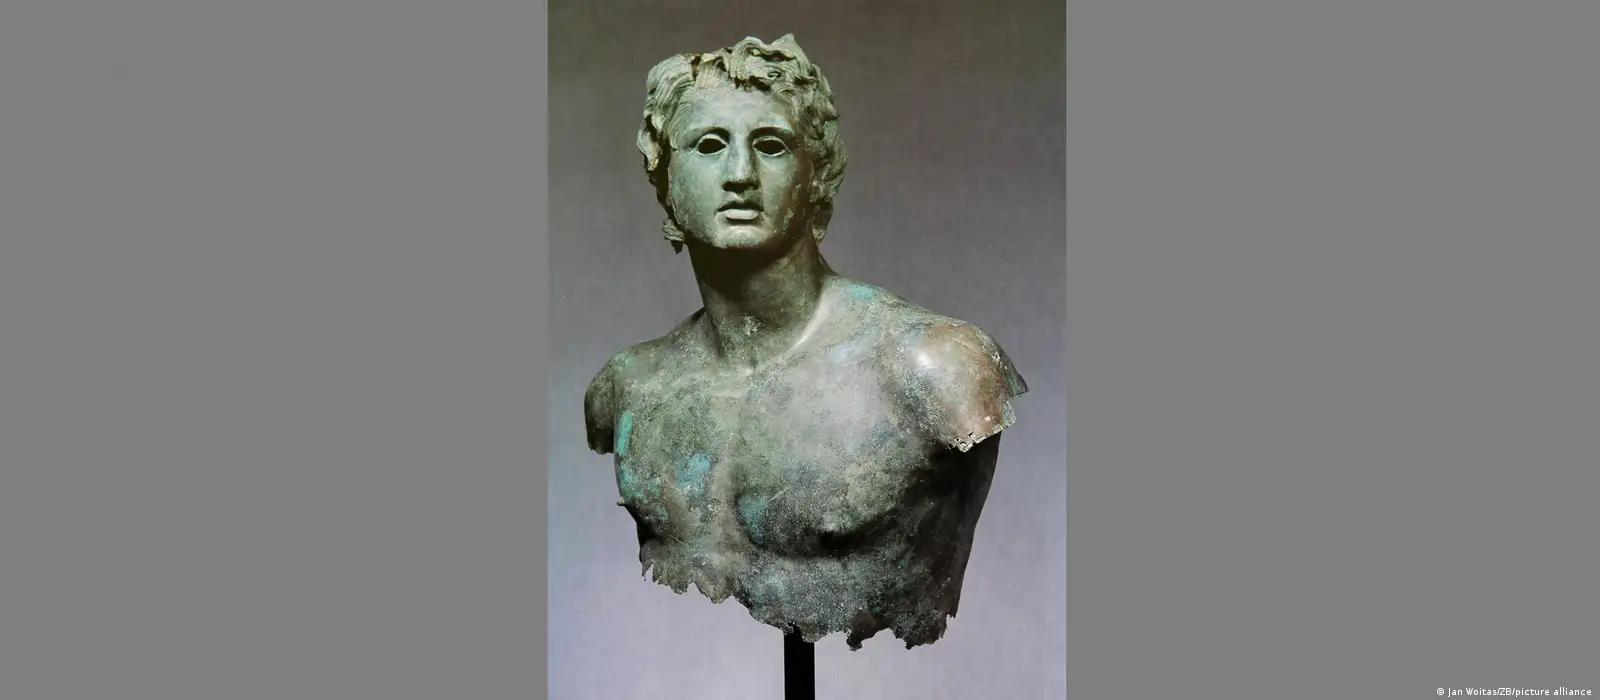 Possess the Greatness of Alexander: Replica of the Bust,Uffizi Gallery